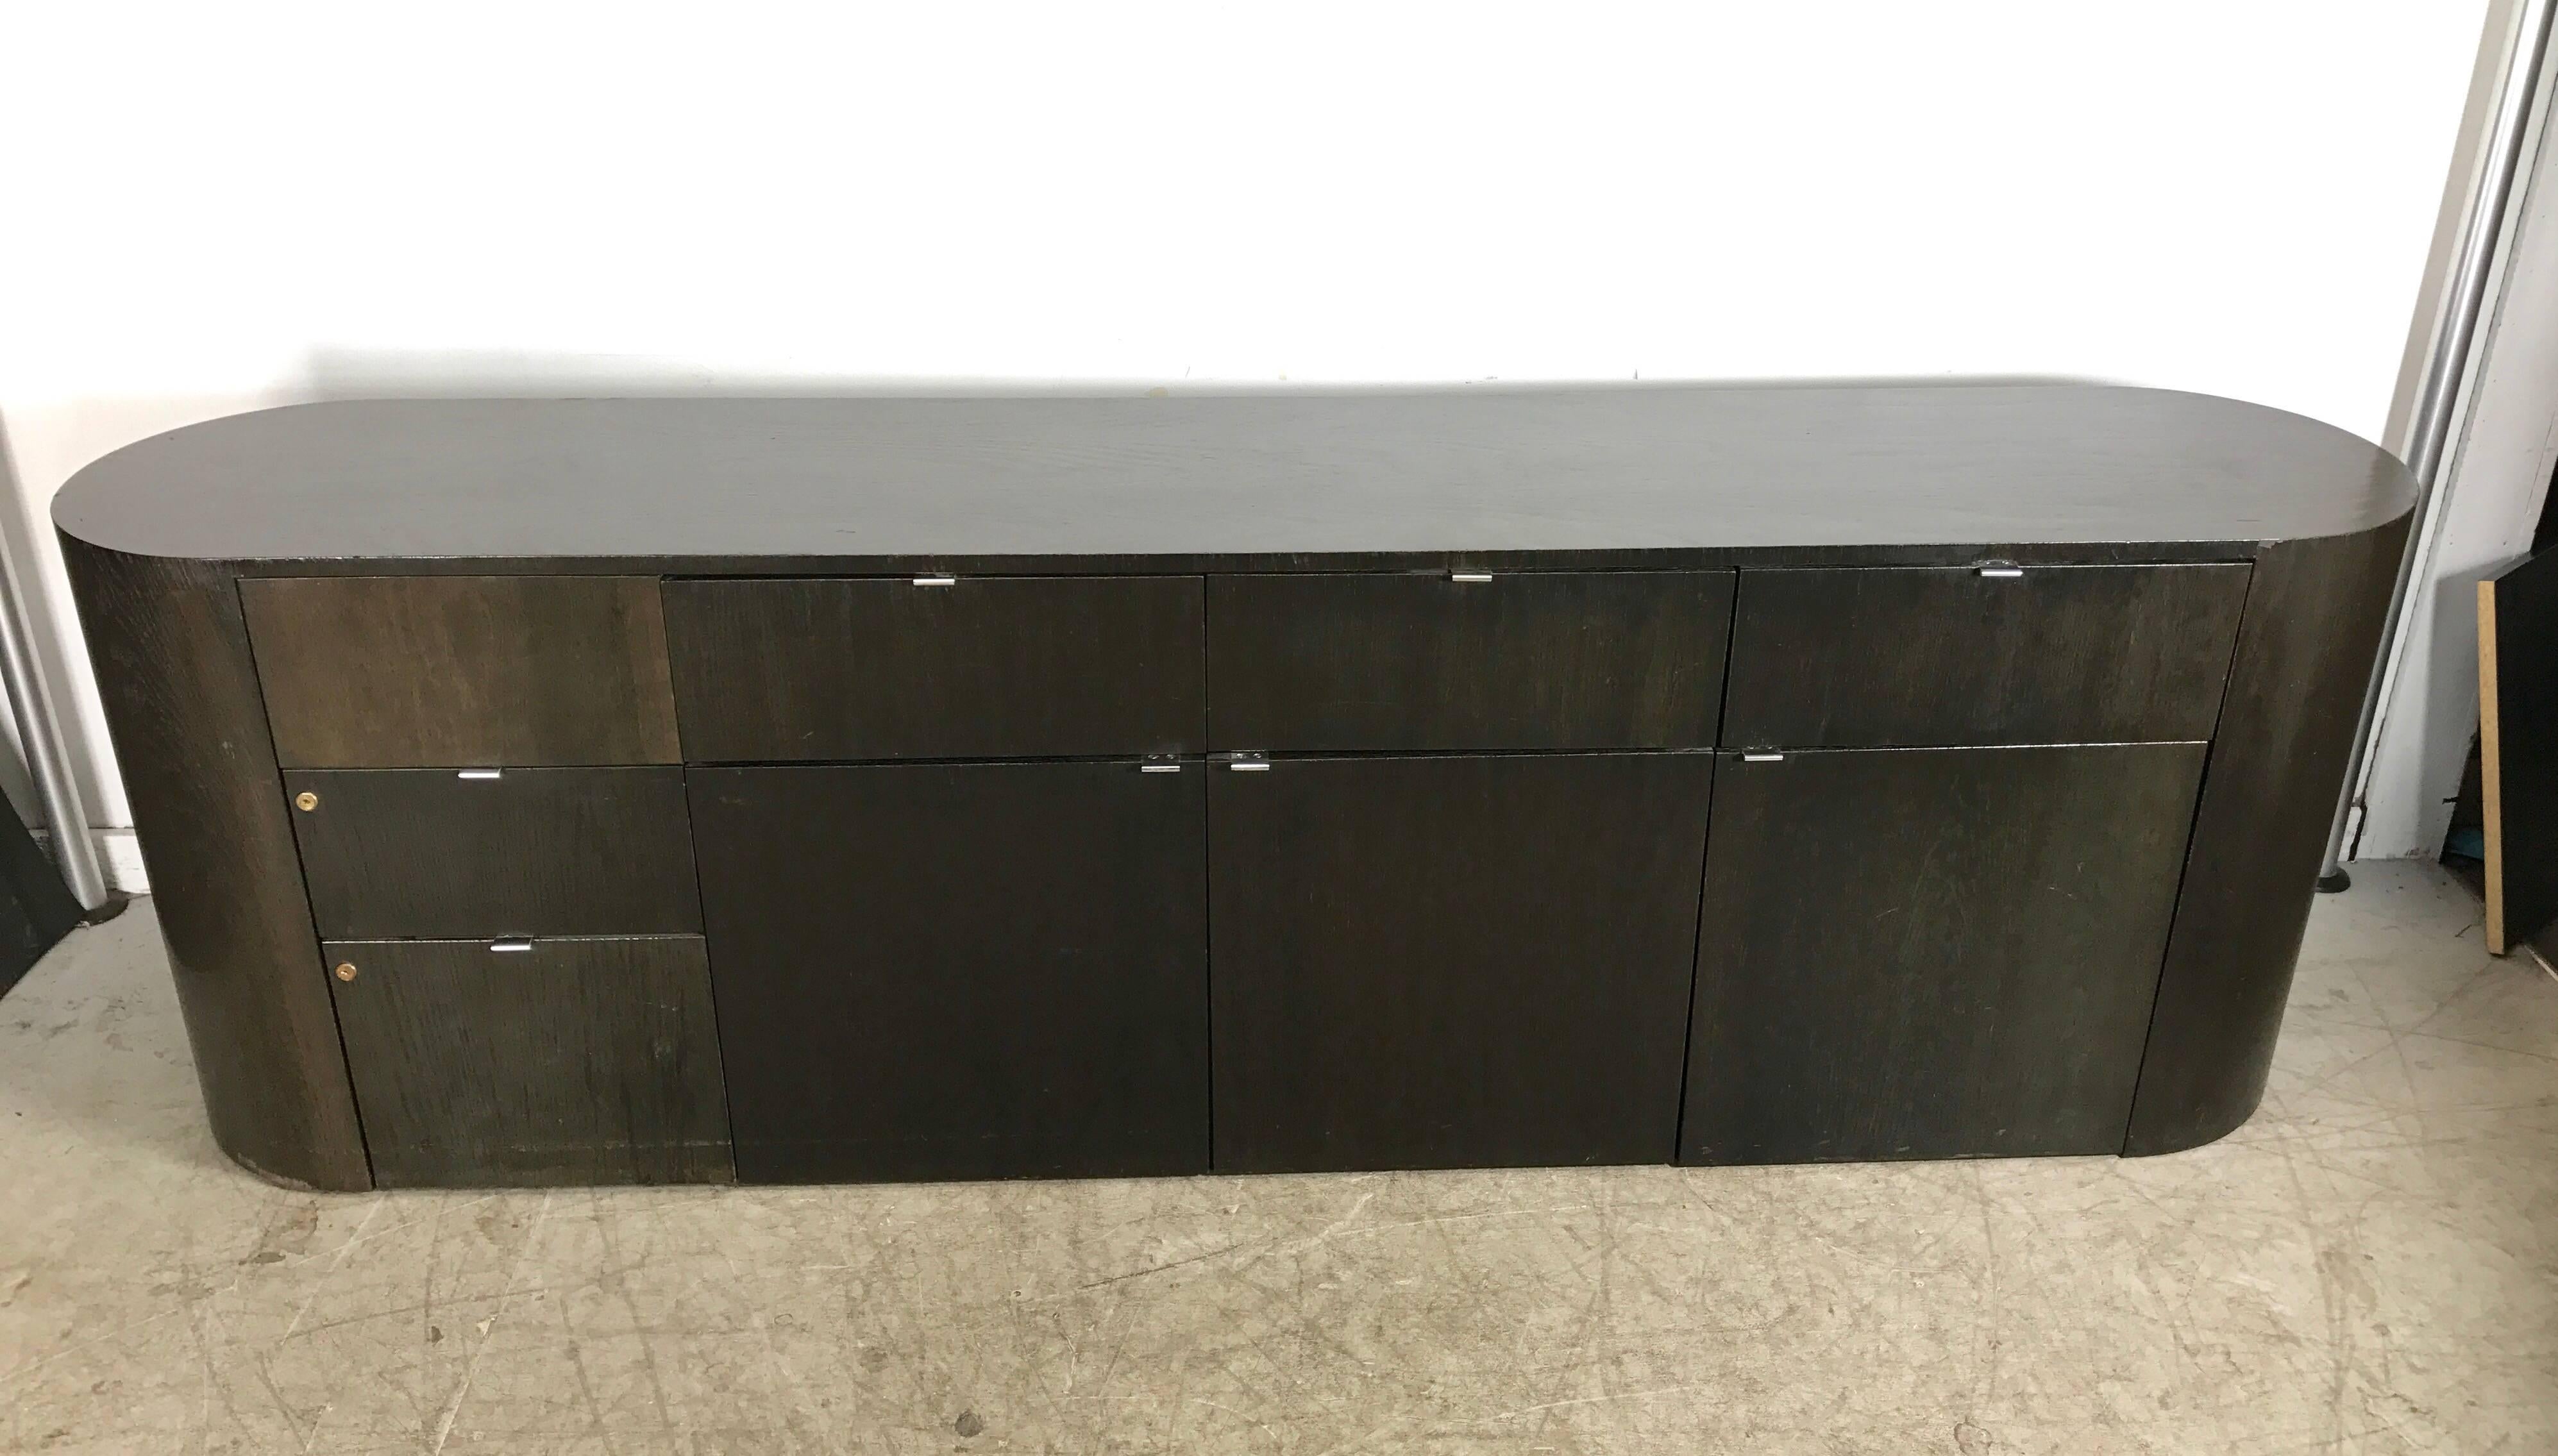 Contemporary Modernist Oval cerused credenza/sideboard, Made in Italy, Simple, sleek design, Classic Knoll-like hand pulls, generous storage, file drawer, doors/shelves, drawers, Superior quality and construction.